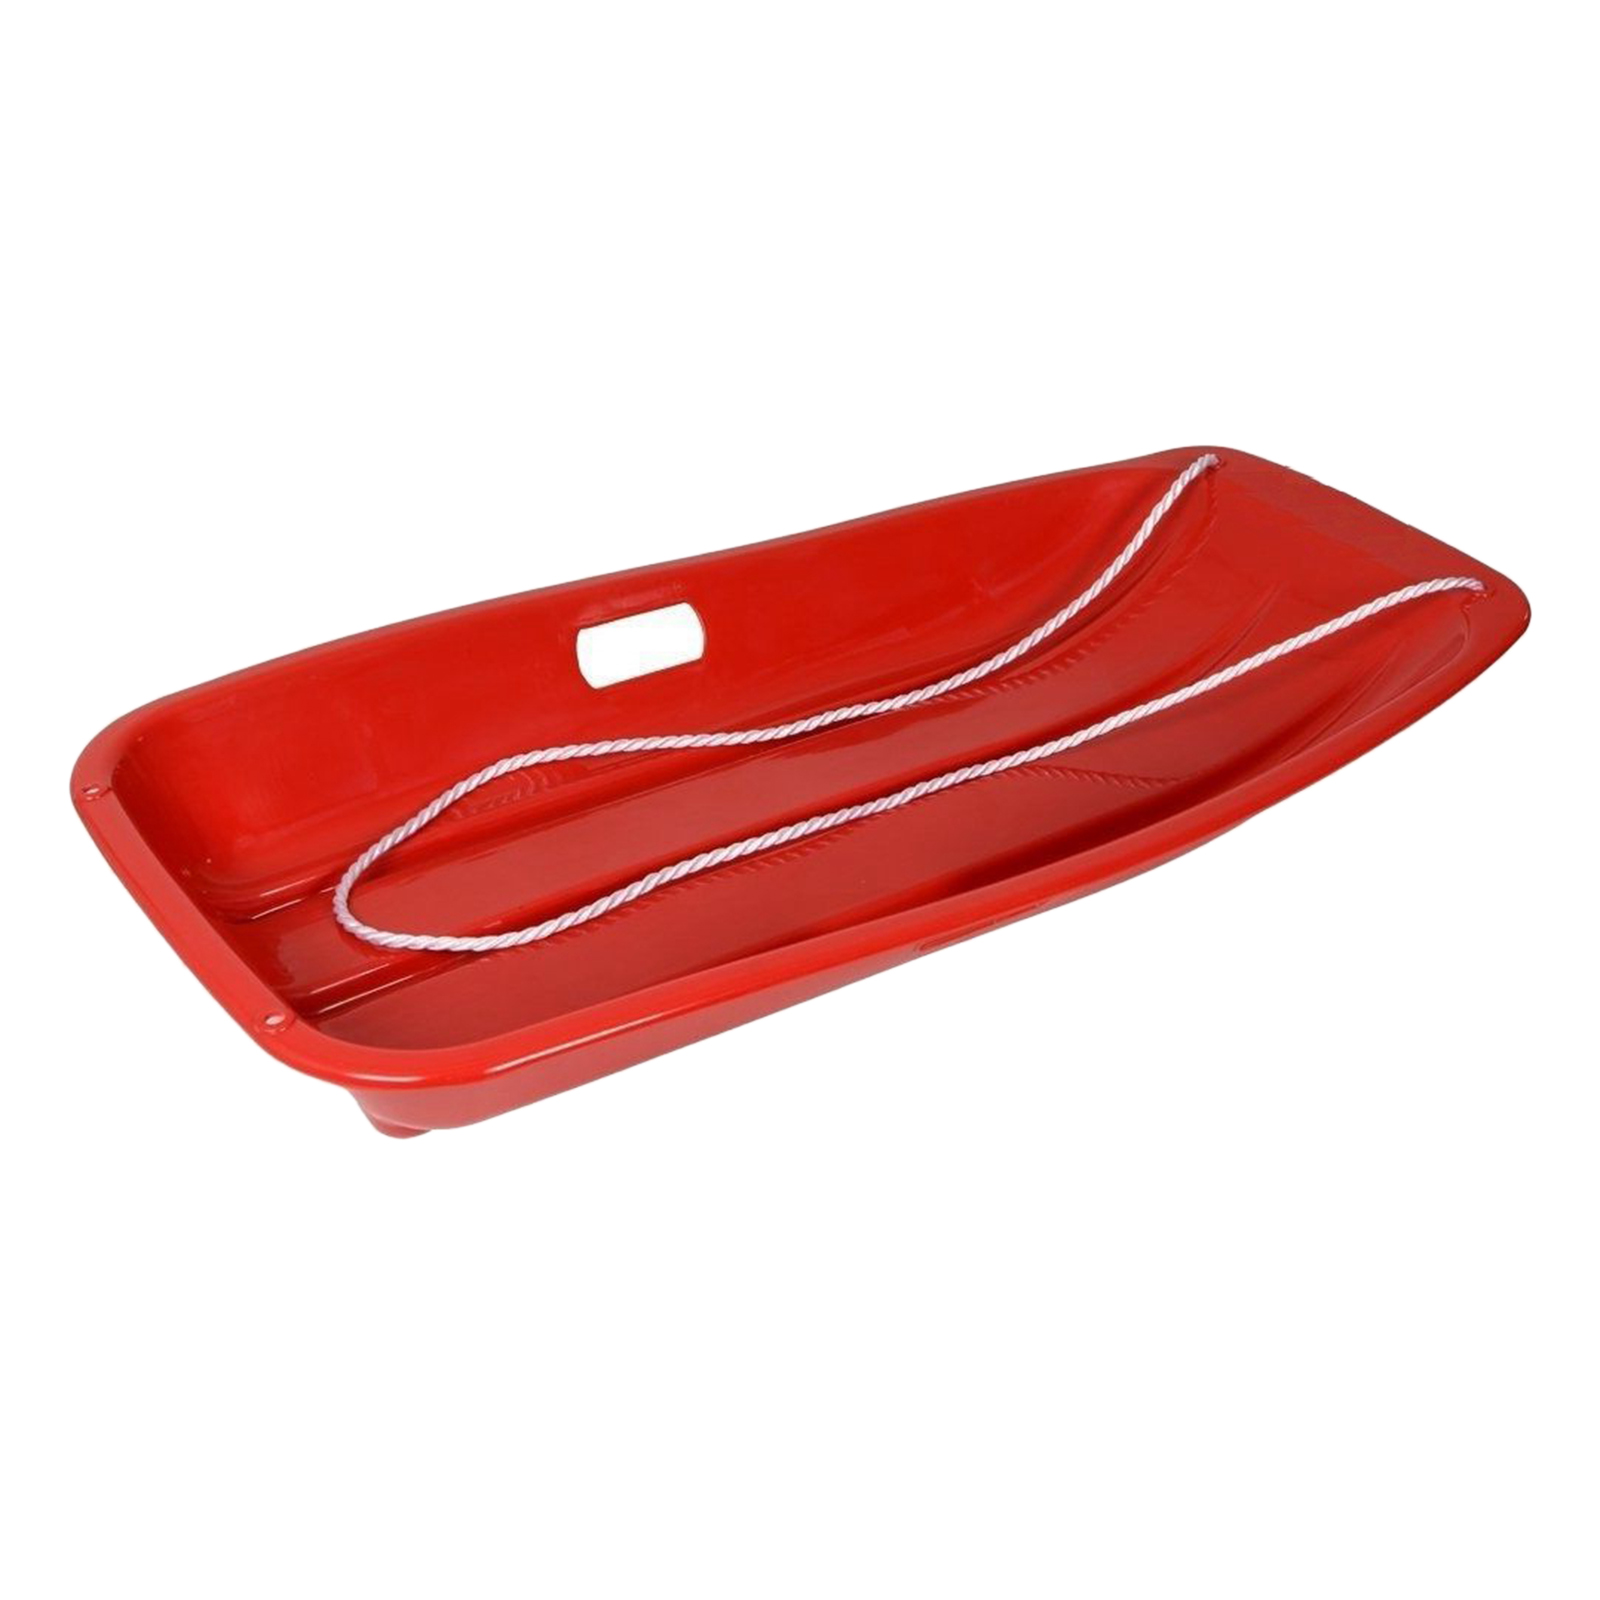 Details about   Snow Sled Outdoor Luge Grass Skiing Board Downhill Skating Toboggan Red 